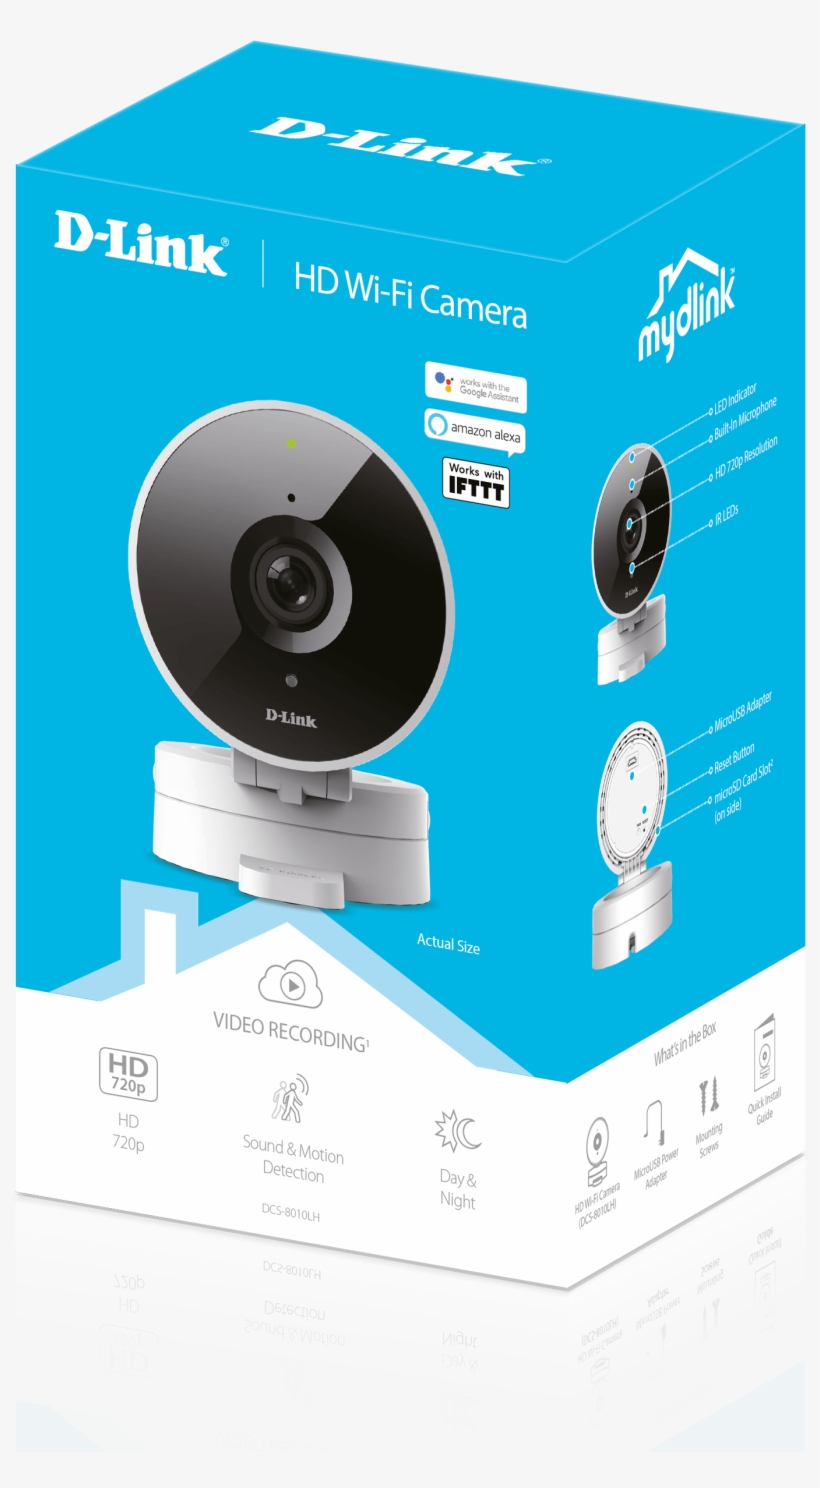 Box Of The Dcs 8010lh Mydlink Hd Wi Fi Camera - D Link, transparent png #4942352